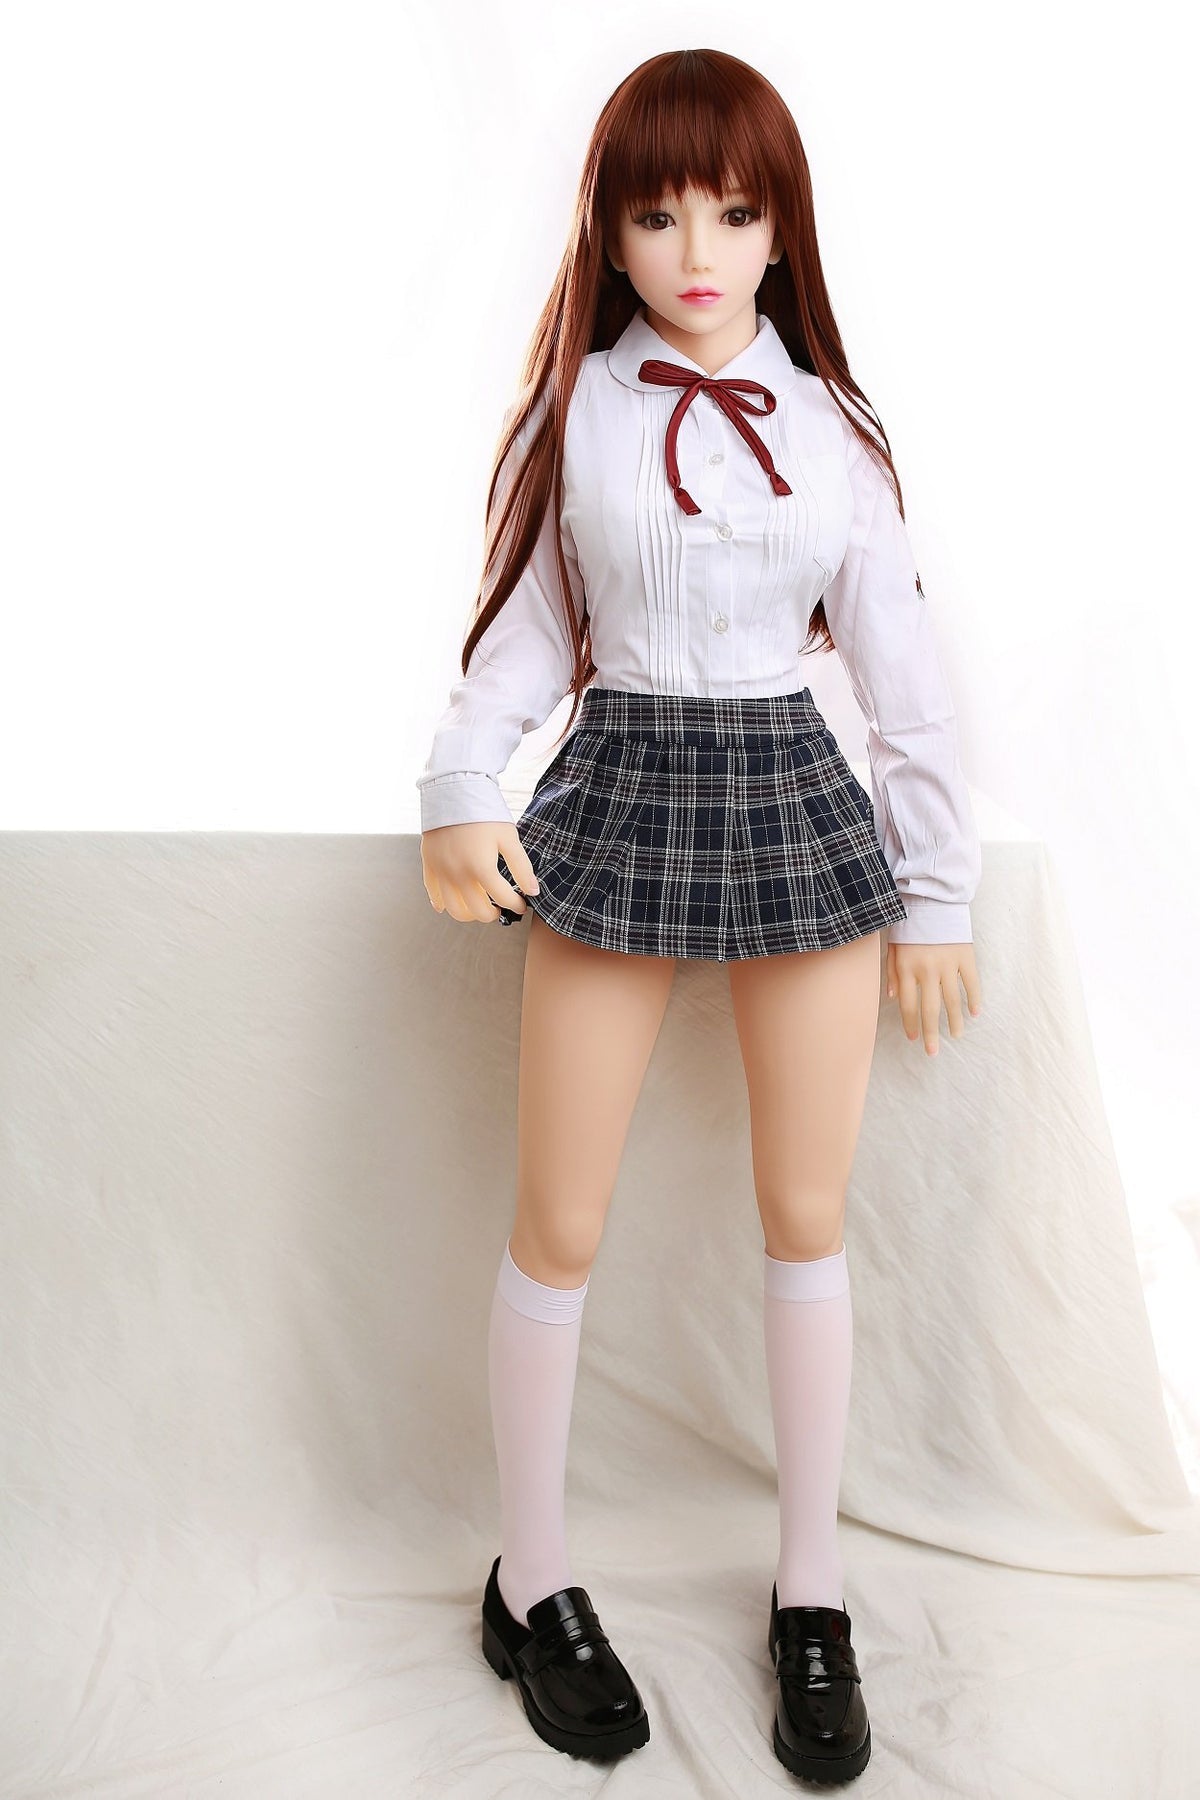 Youq Doll 145cm B Cup Small Breasts Pure And Slim Cute Sex Doll Shimin